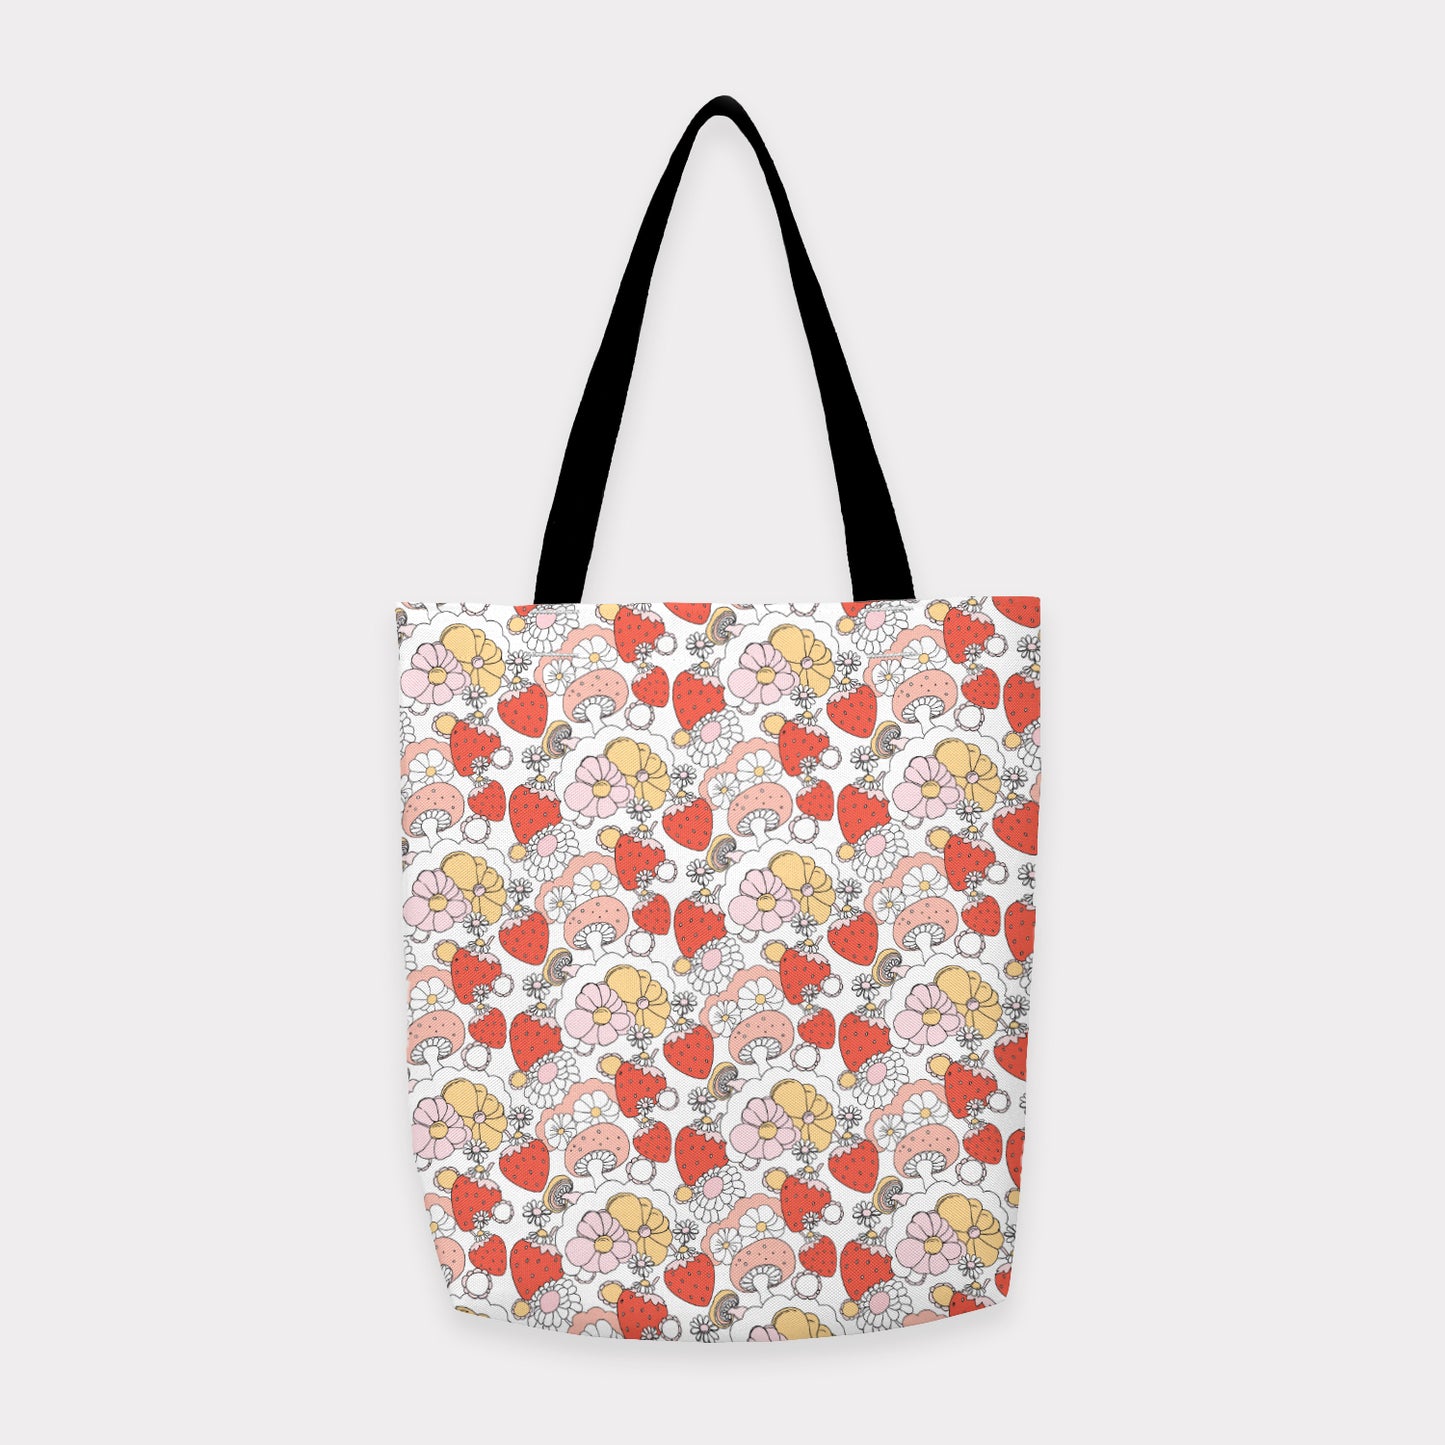 Strawberries and Flowers Tote Bag